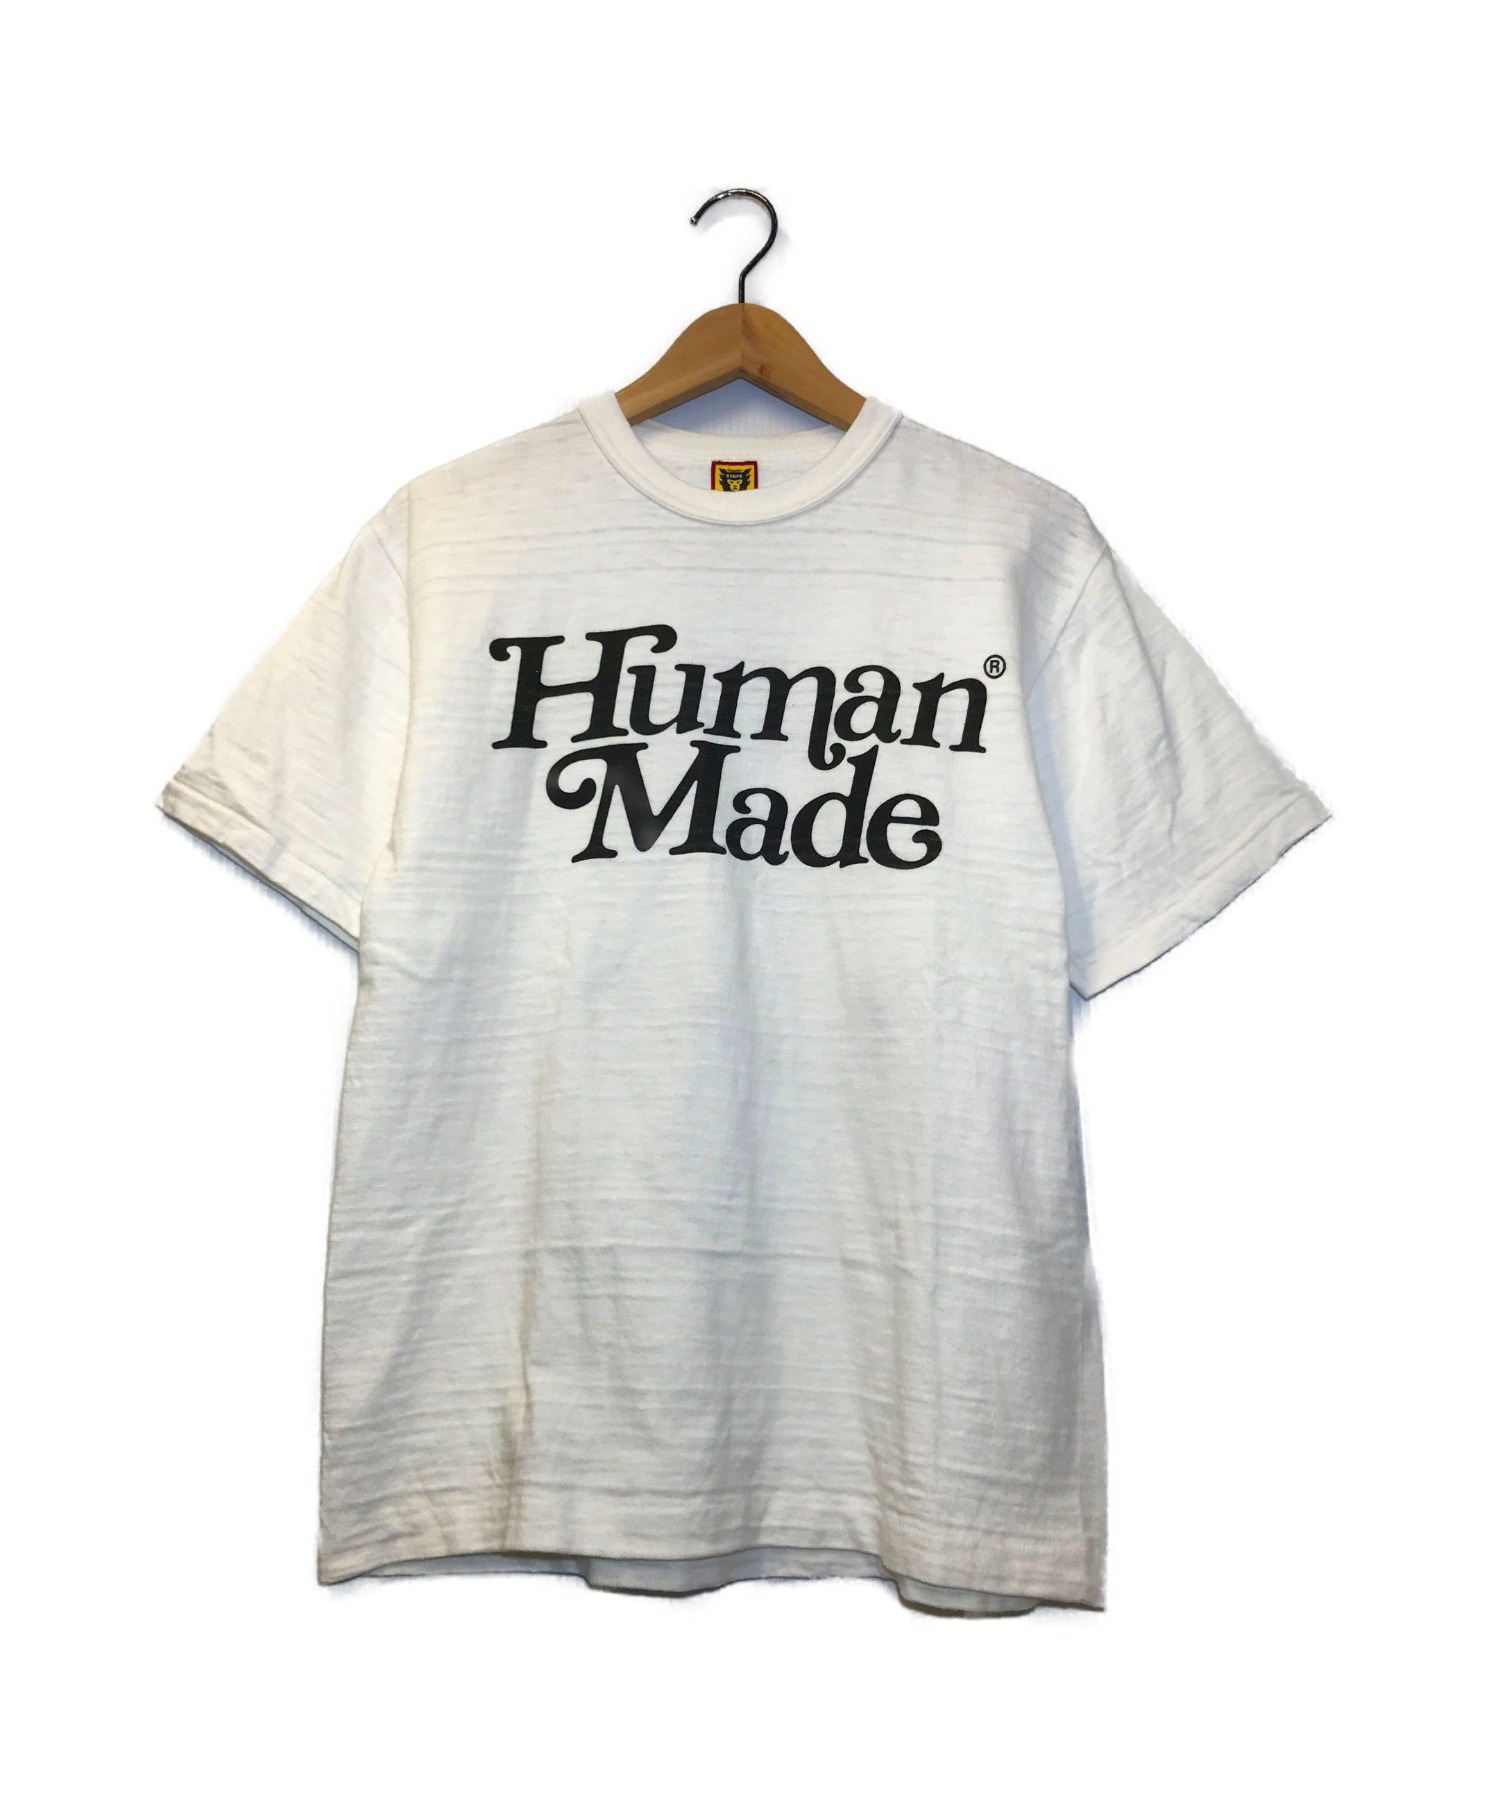 2022A/W新作送料無料 HUMAN MADE ✖︎Girls Don't Cry コラボT 